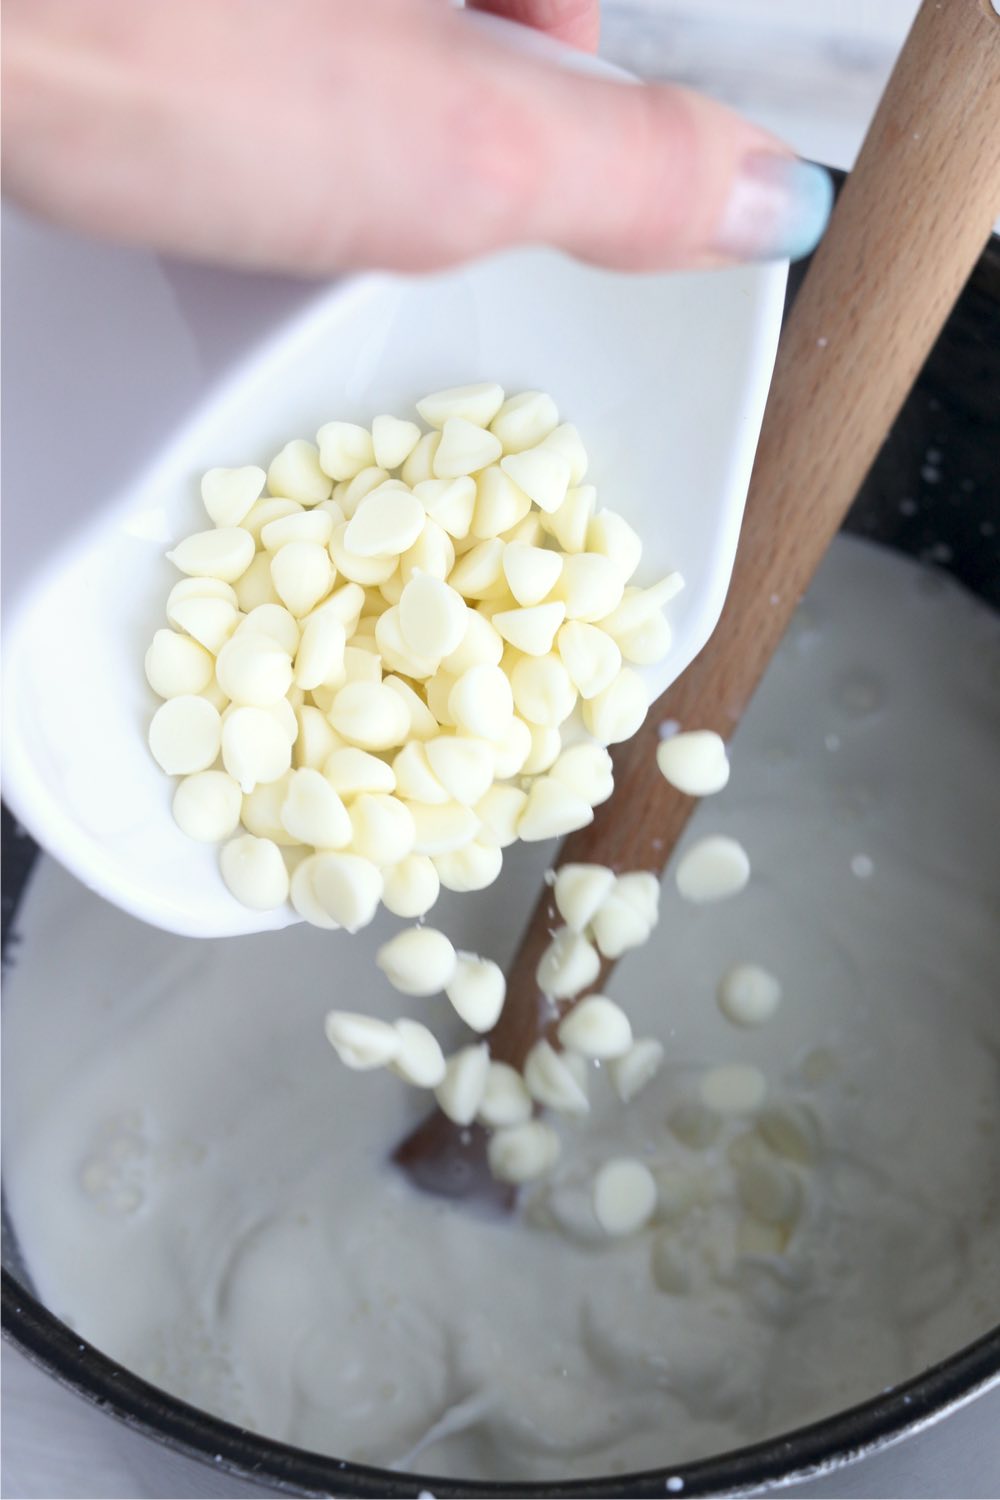 pouring white chocolate chips into stock pot filled with milk